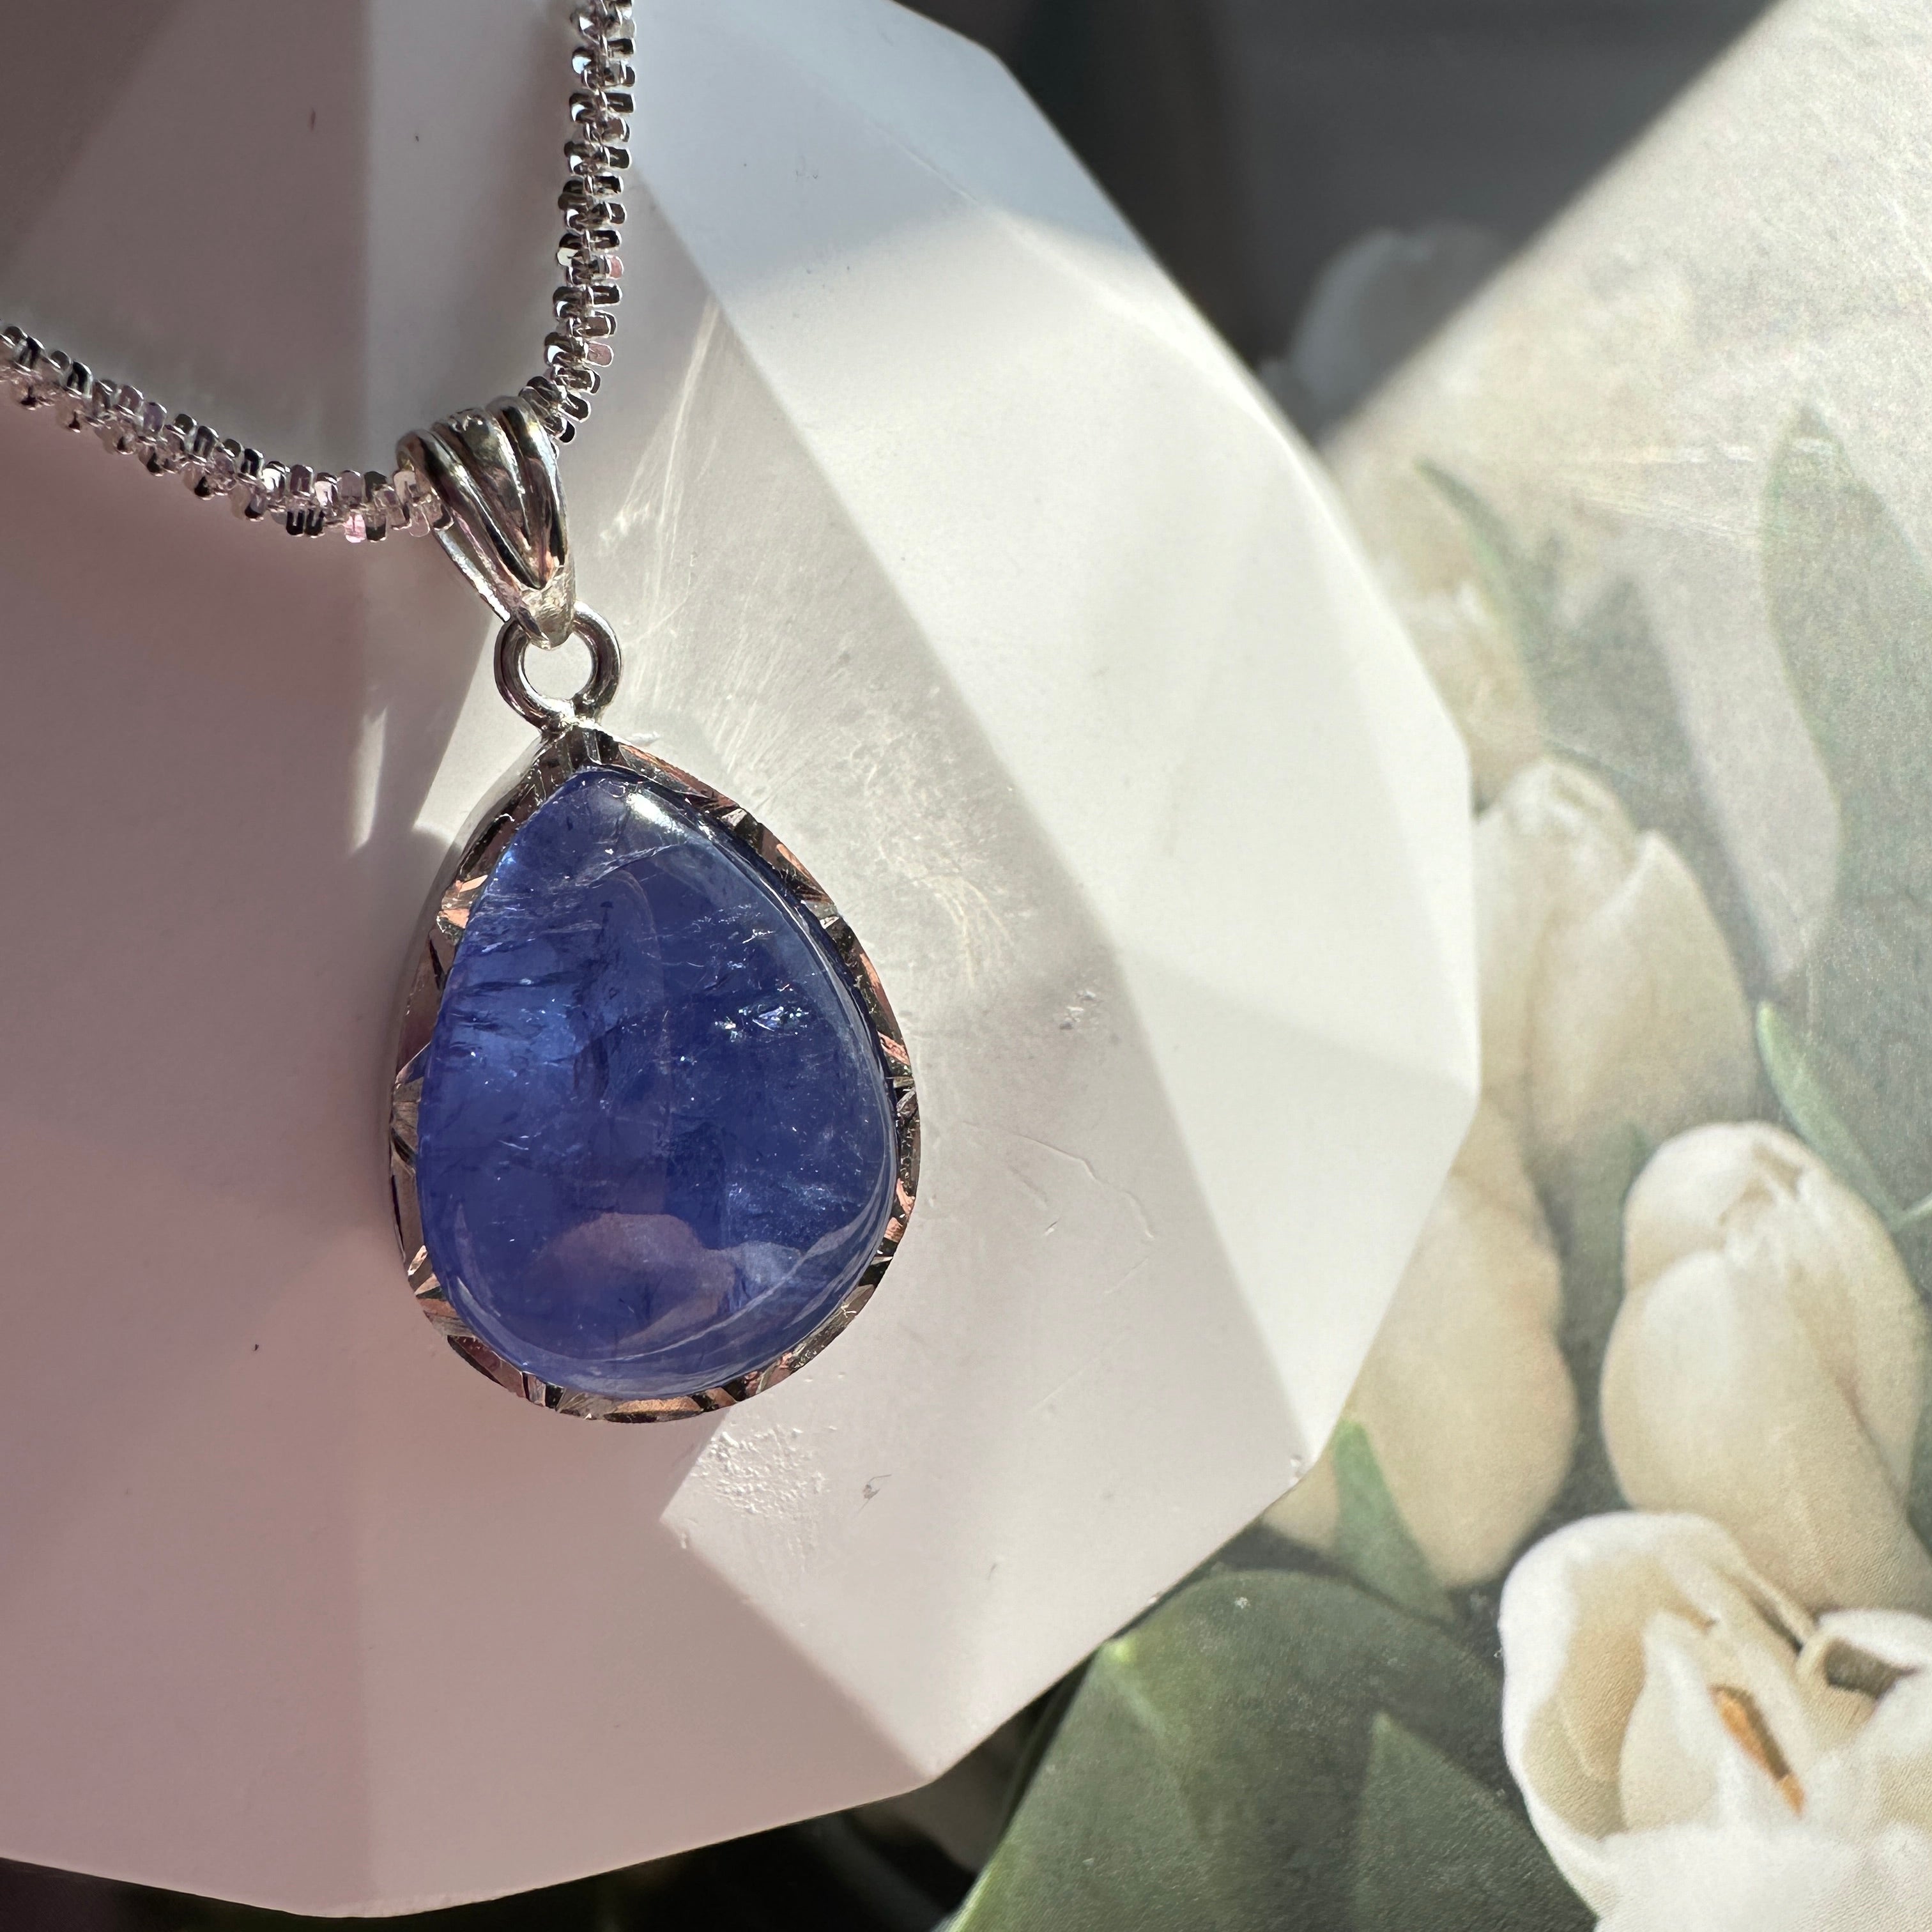 S925 Charoite Necklace Adjustable Chain Length ★WYSIWYG★